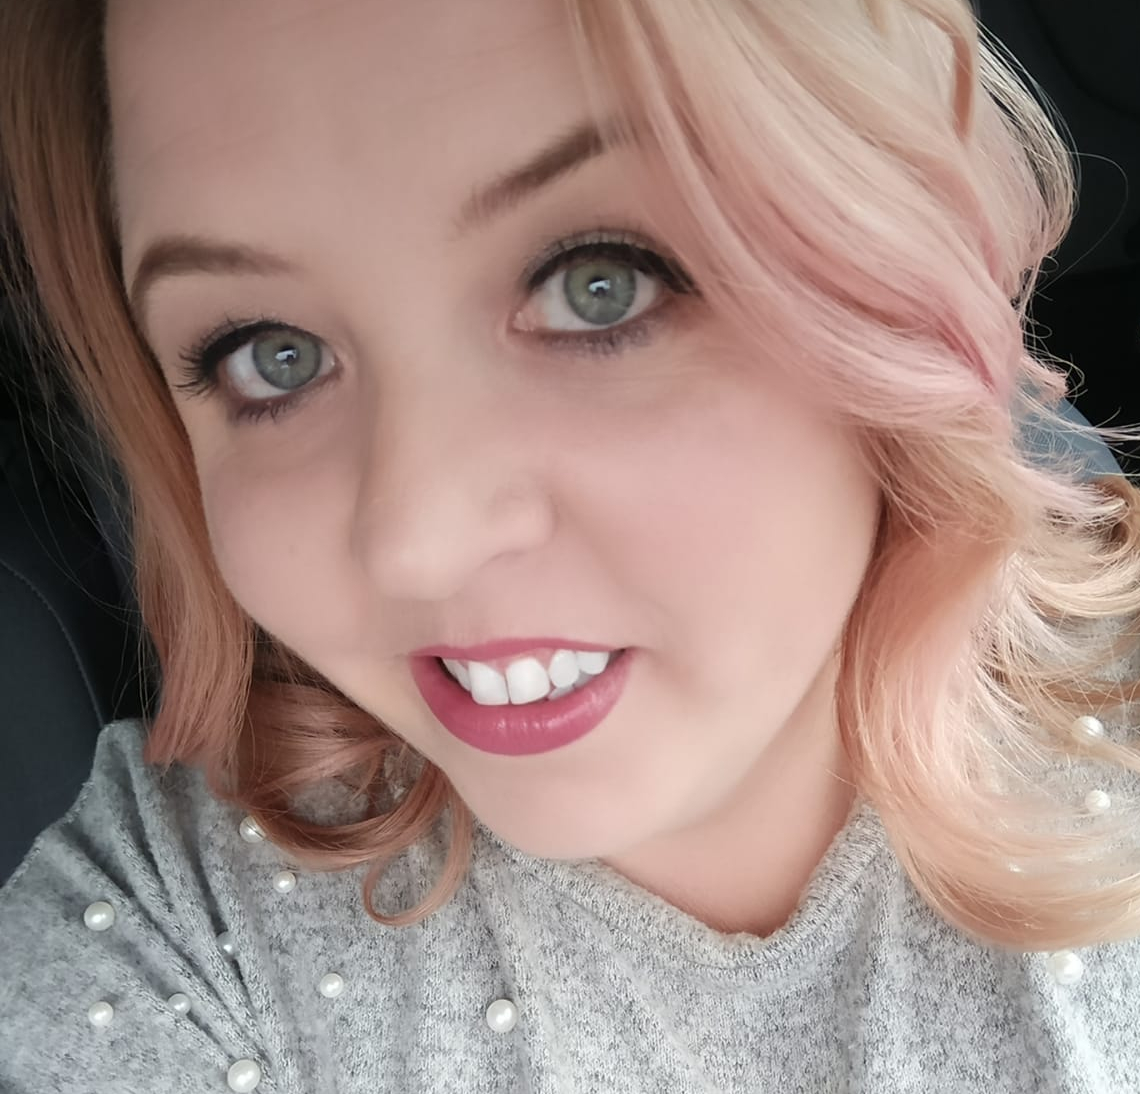 Rose Gold Hair from Garnier Olia - Unfiltered Pics & Review! 